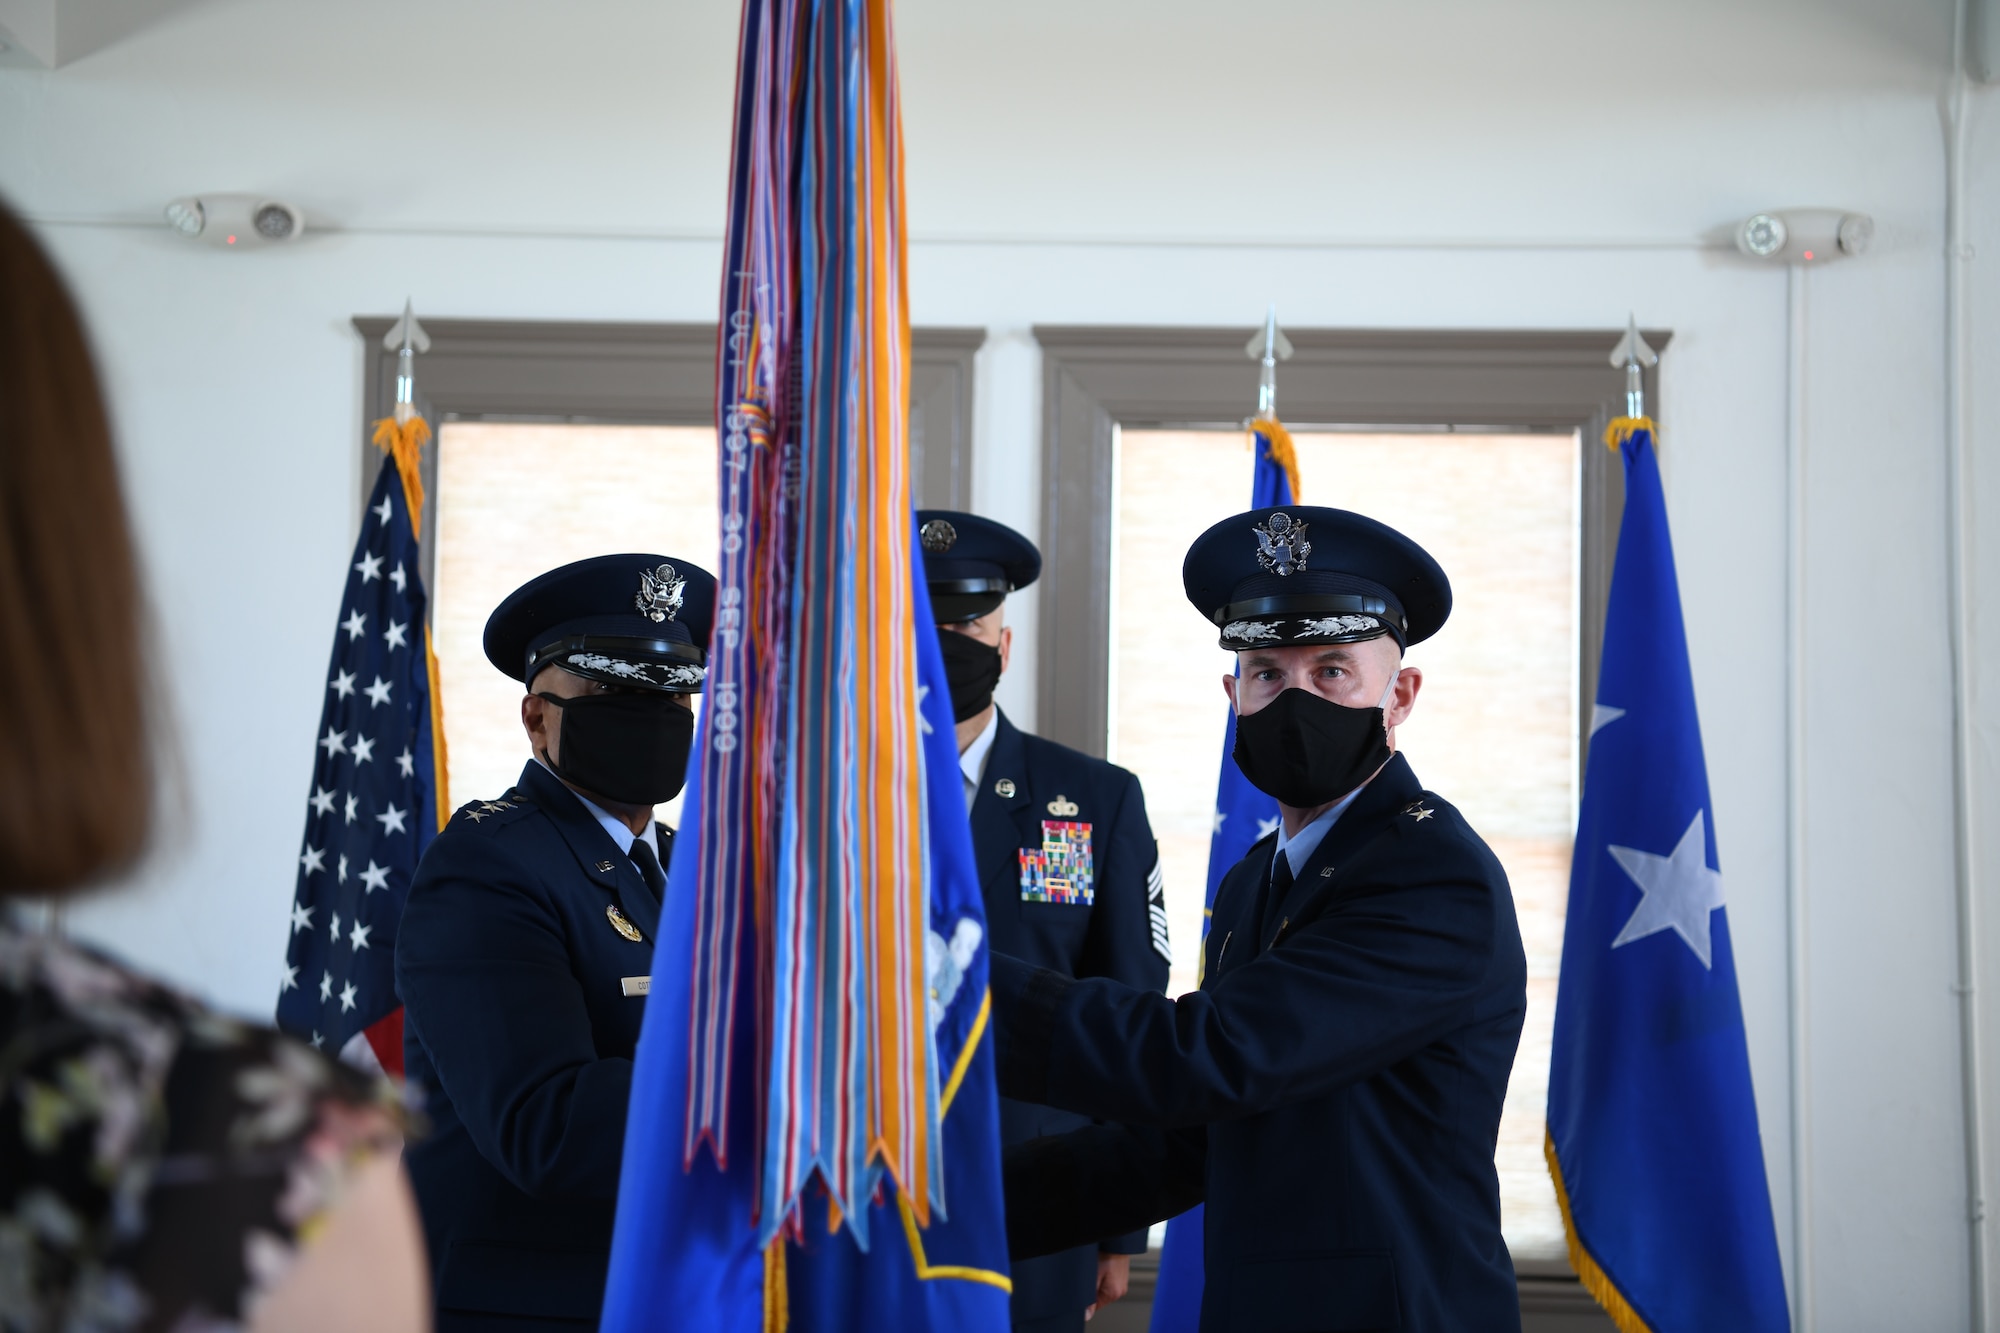 Lt. Gen. Anthony Cotton, deputy commander of Air Force Global Strike Command, presents the guidon to Maj. Gen. Michael Lutton, the new 20th Air Force commander, during a change of command ceremony, 8 July, 2020, F. E. Warren Air Force Base, Wyo. During the ceremony, Maj. Gen. Michael J. Lutton took command of 20th Air Force from Maj. Gen. Ferdinand “Fred” B. Stoss. (U. S. Air Force photo by Senior Airman Braydon Williams)